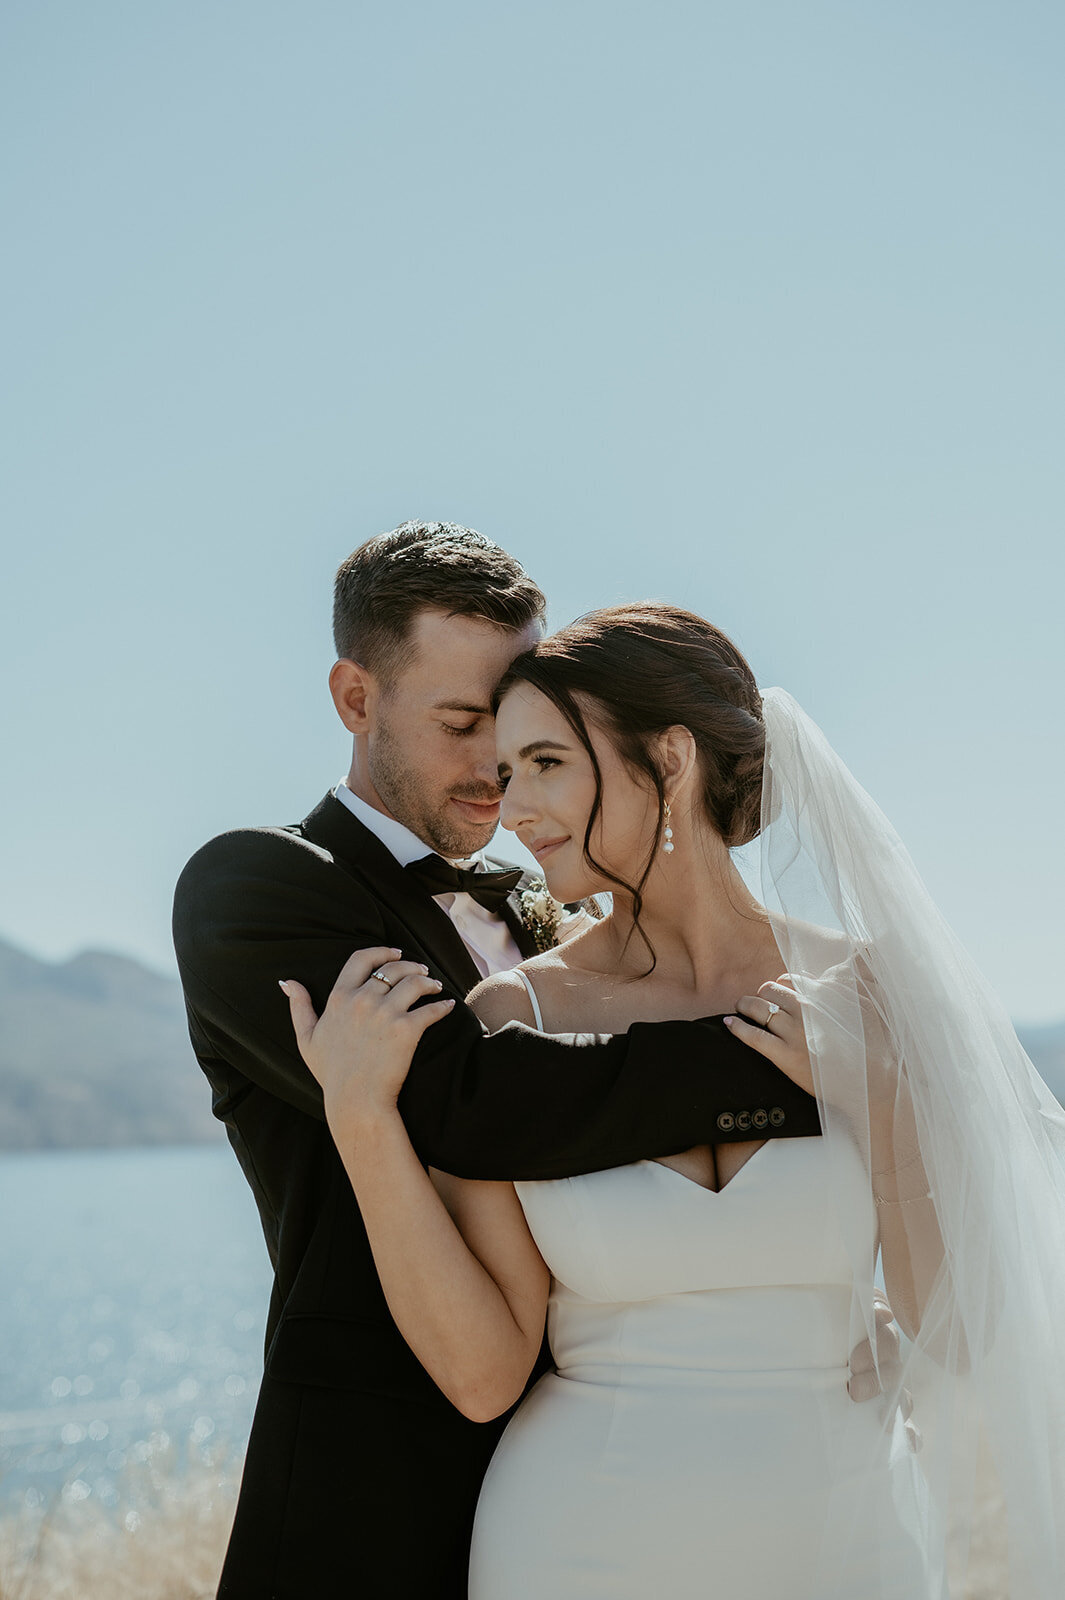 Modern bride and groom in black tux hold each other near a lake.